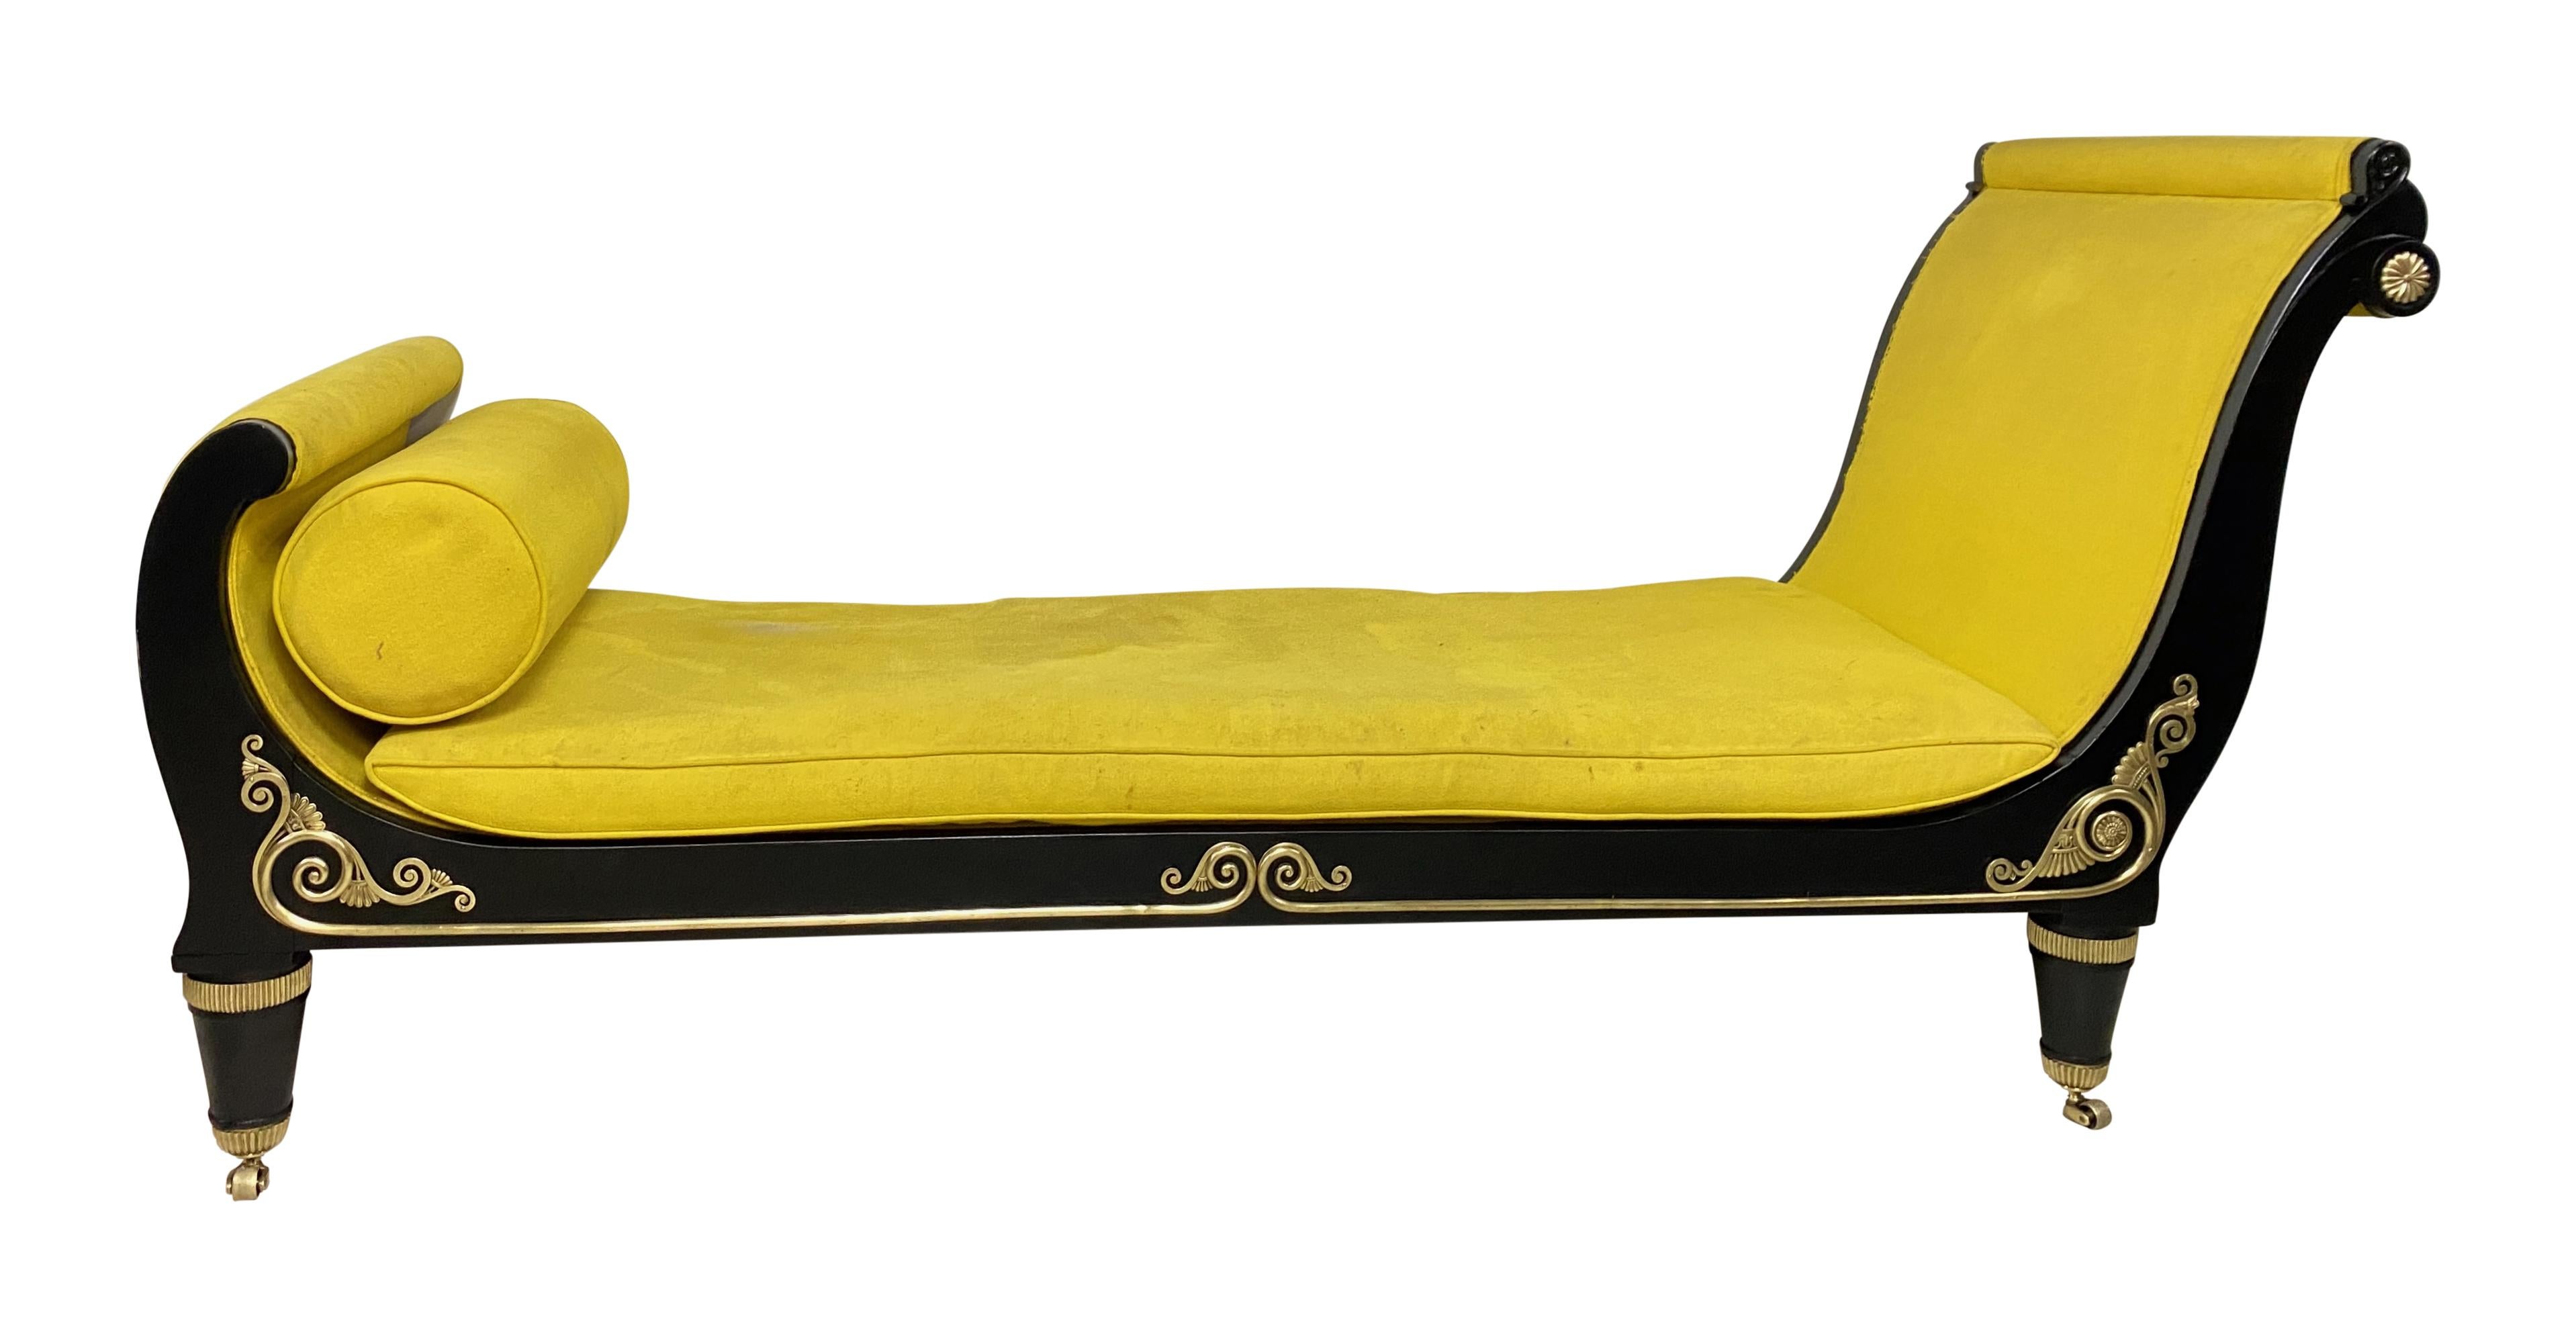 Early 19th Century French Empire Chaise Lounge Daybed For Sale 2